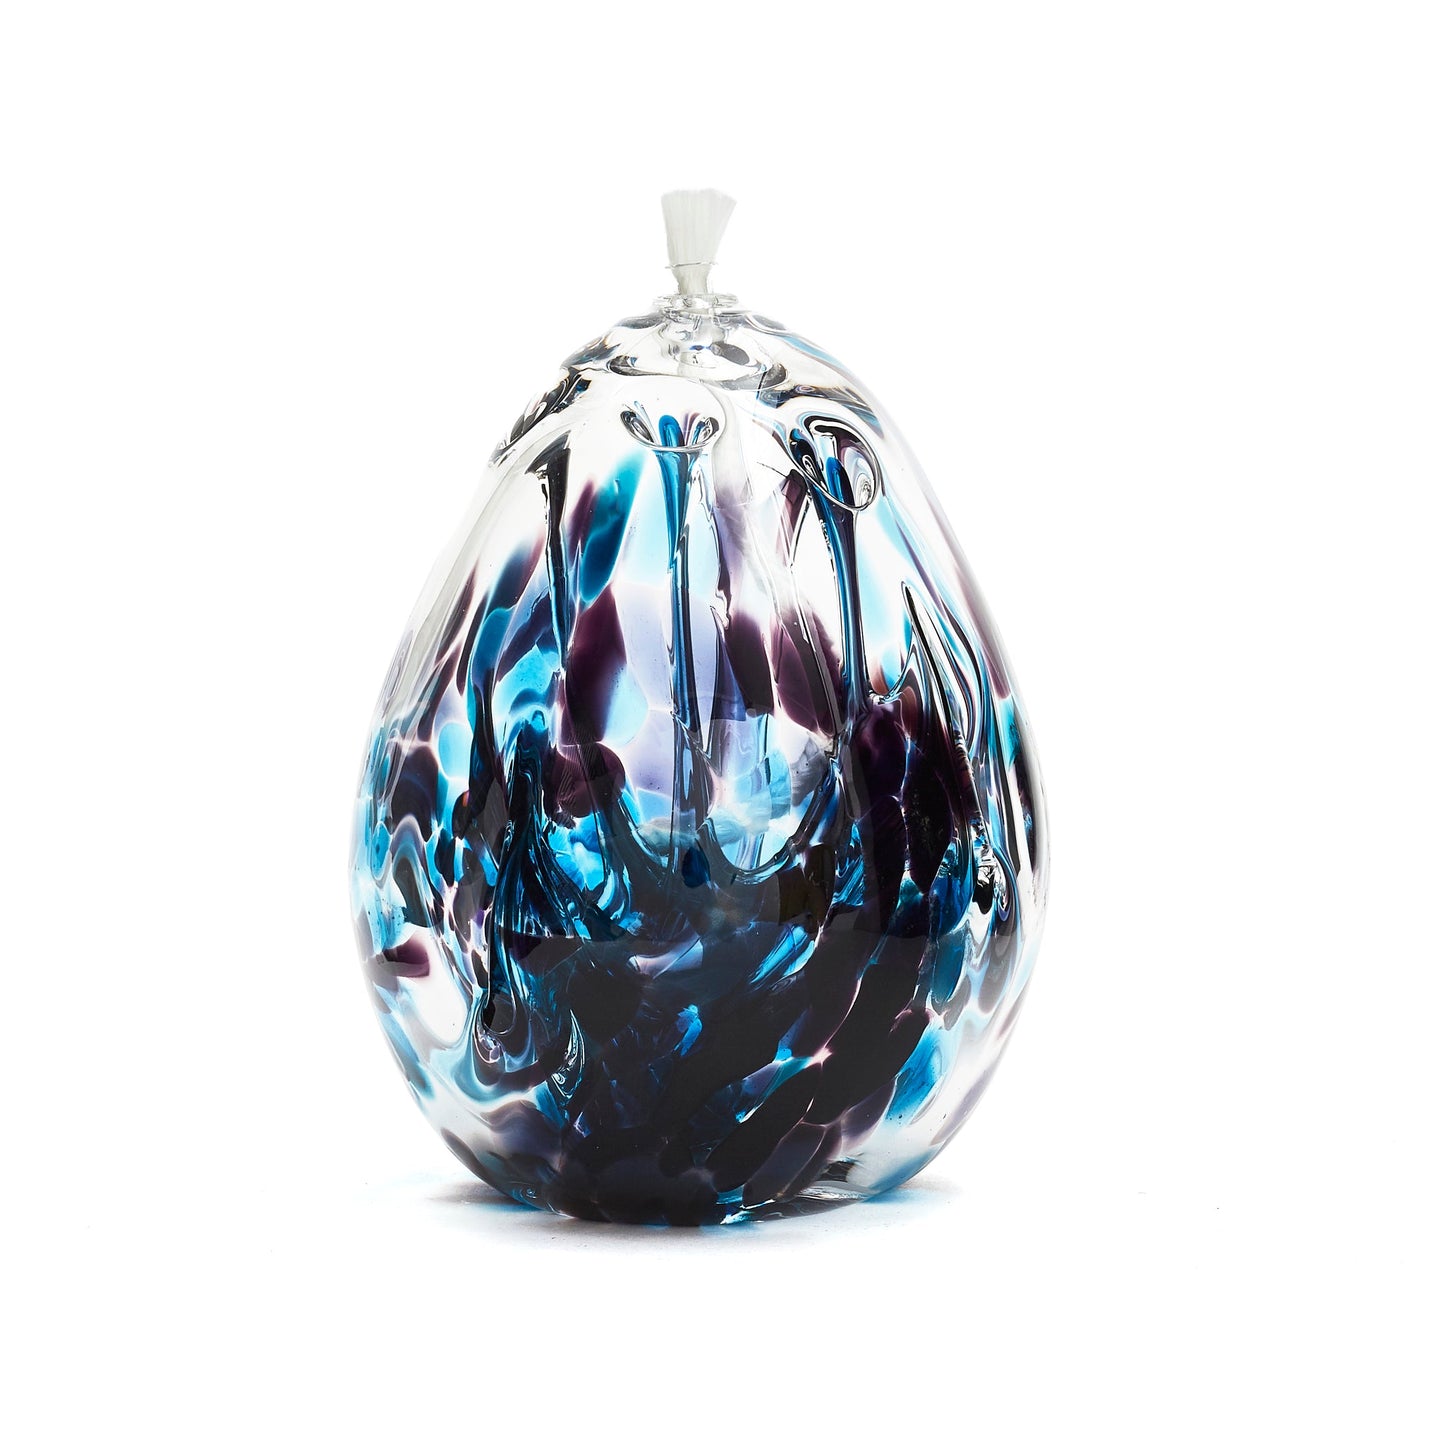 Handmade tall teardrop purple and teal glass oil lamp. Made in Ontario Canada by Gray Art Glass.